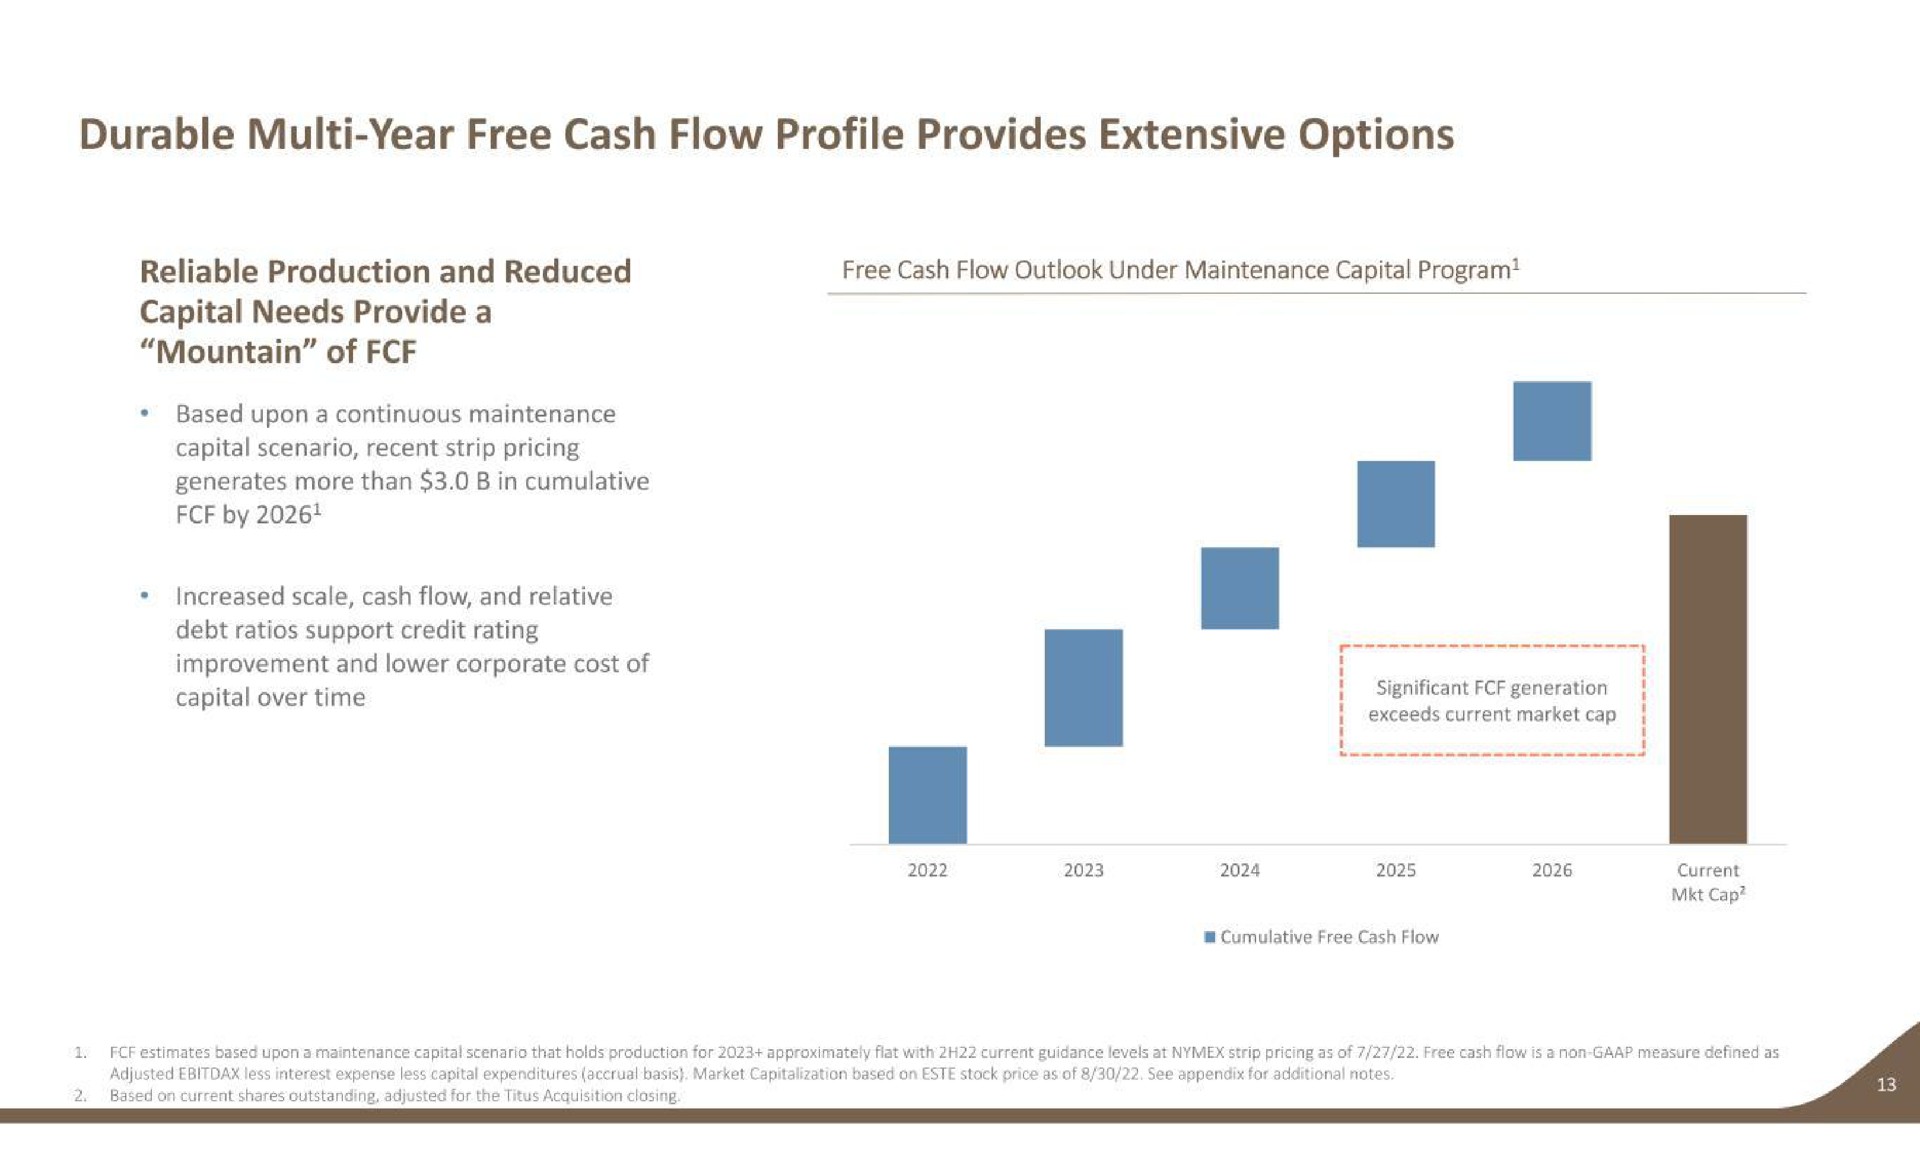 durable year free cash flow profile provides extensive options reliable production and reduced capital needs provide a mountain of free cash flow outlook under maintenance capital program based upon a continuous maintenance by current | Earthstone Energy